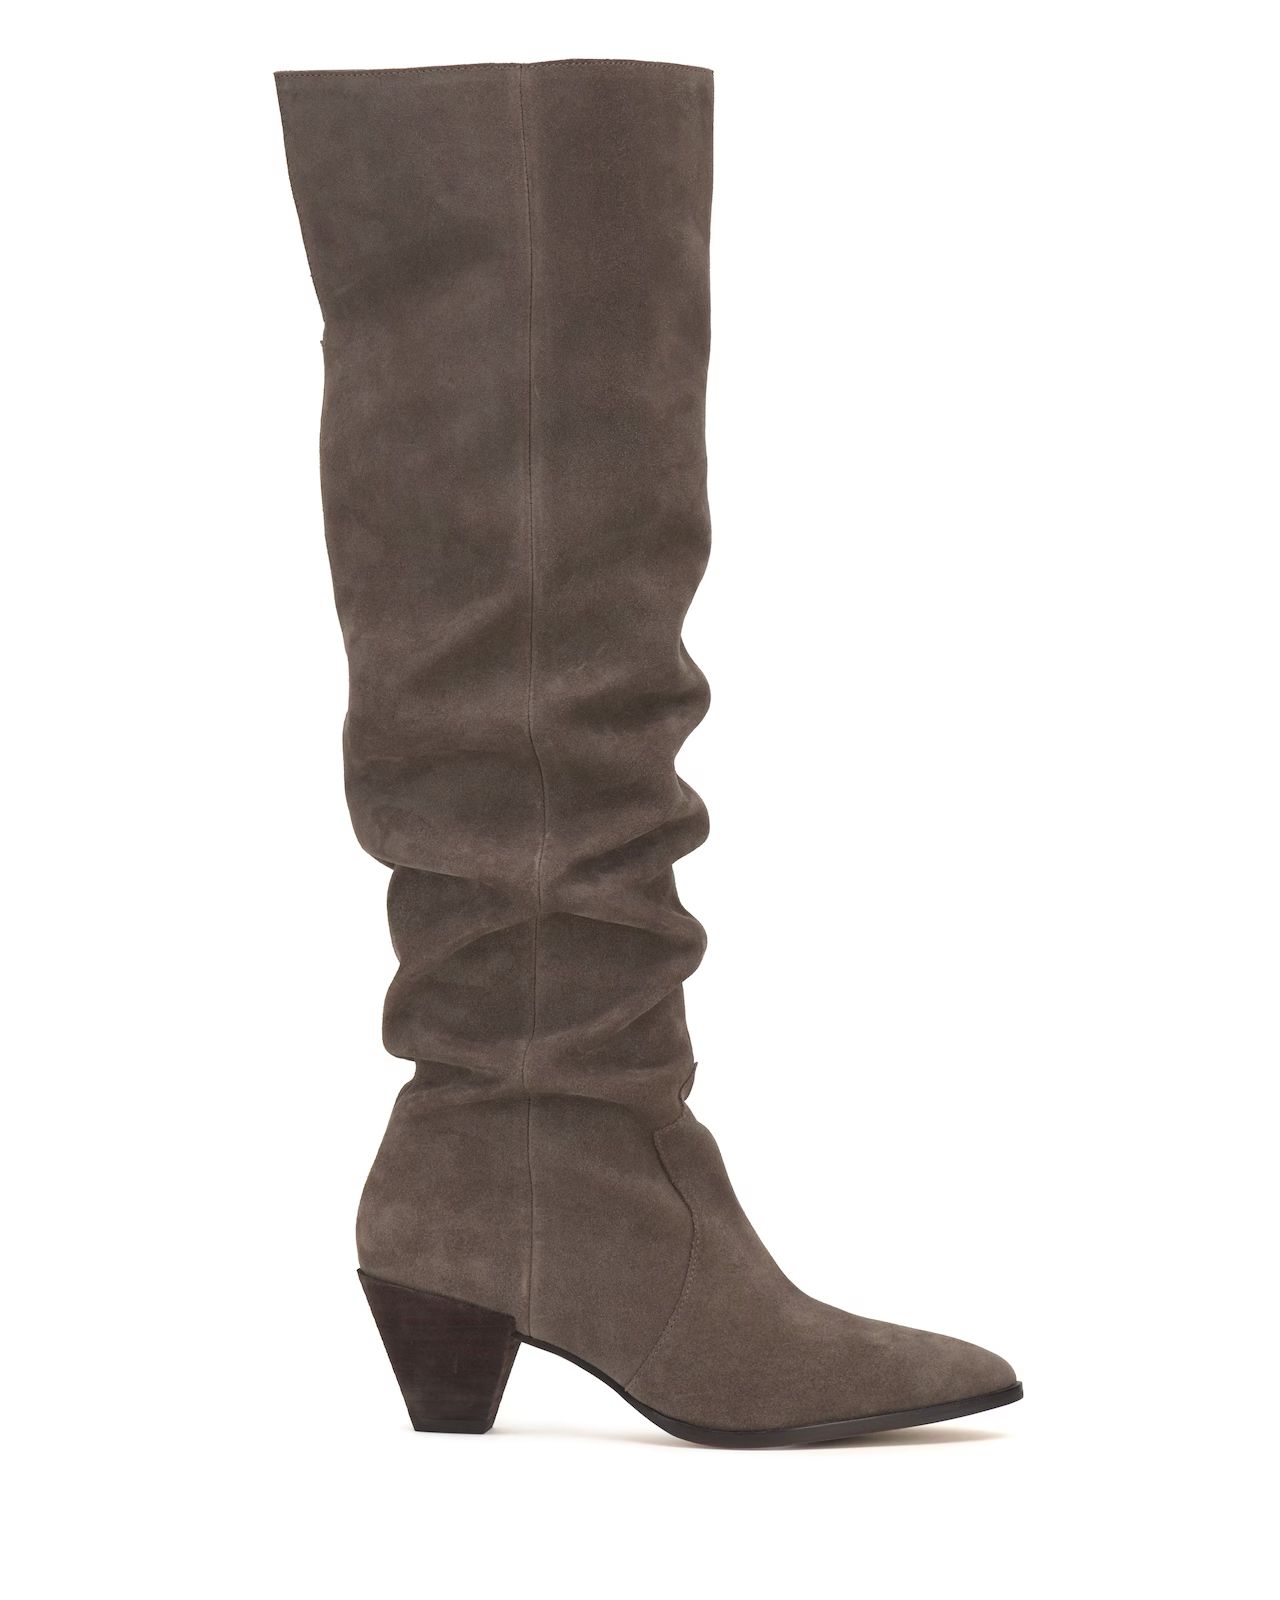 Vince Camuto Sewinny Extra Wide-Calf Over-the-Knee Boot | Vince Camuto